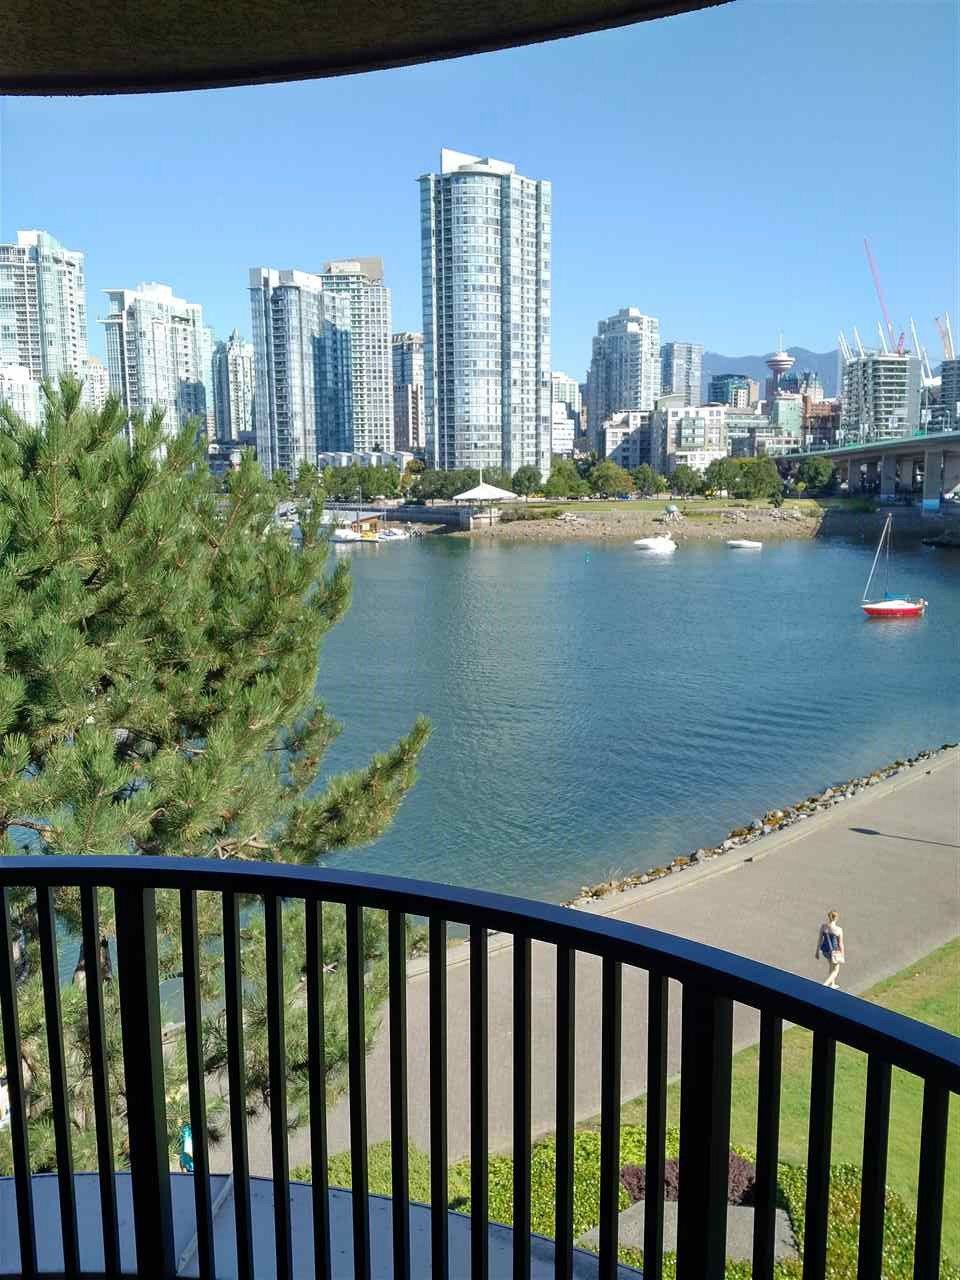 Main Photo: 411 1859 SPYGLASS Place in Vancouver: False Creek Condo for sale (Vancouver West)  : MLS®# R2100993